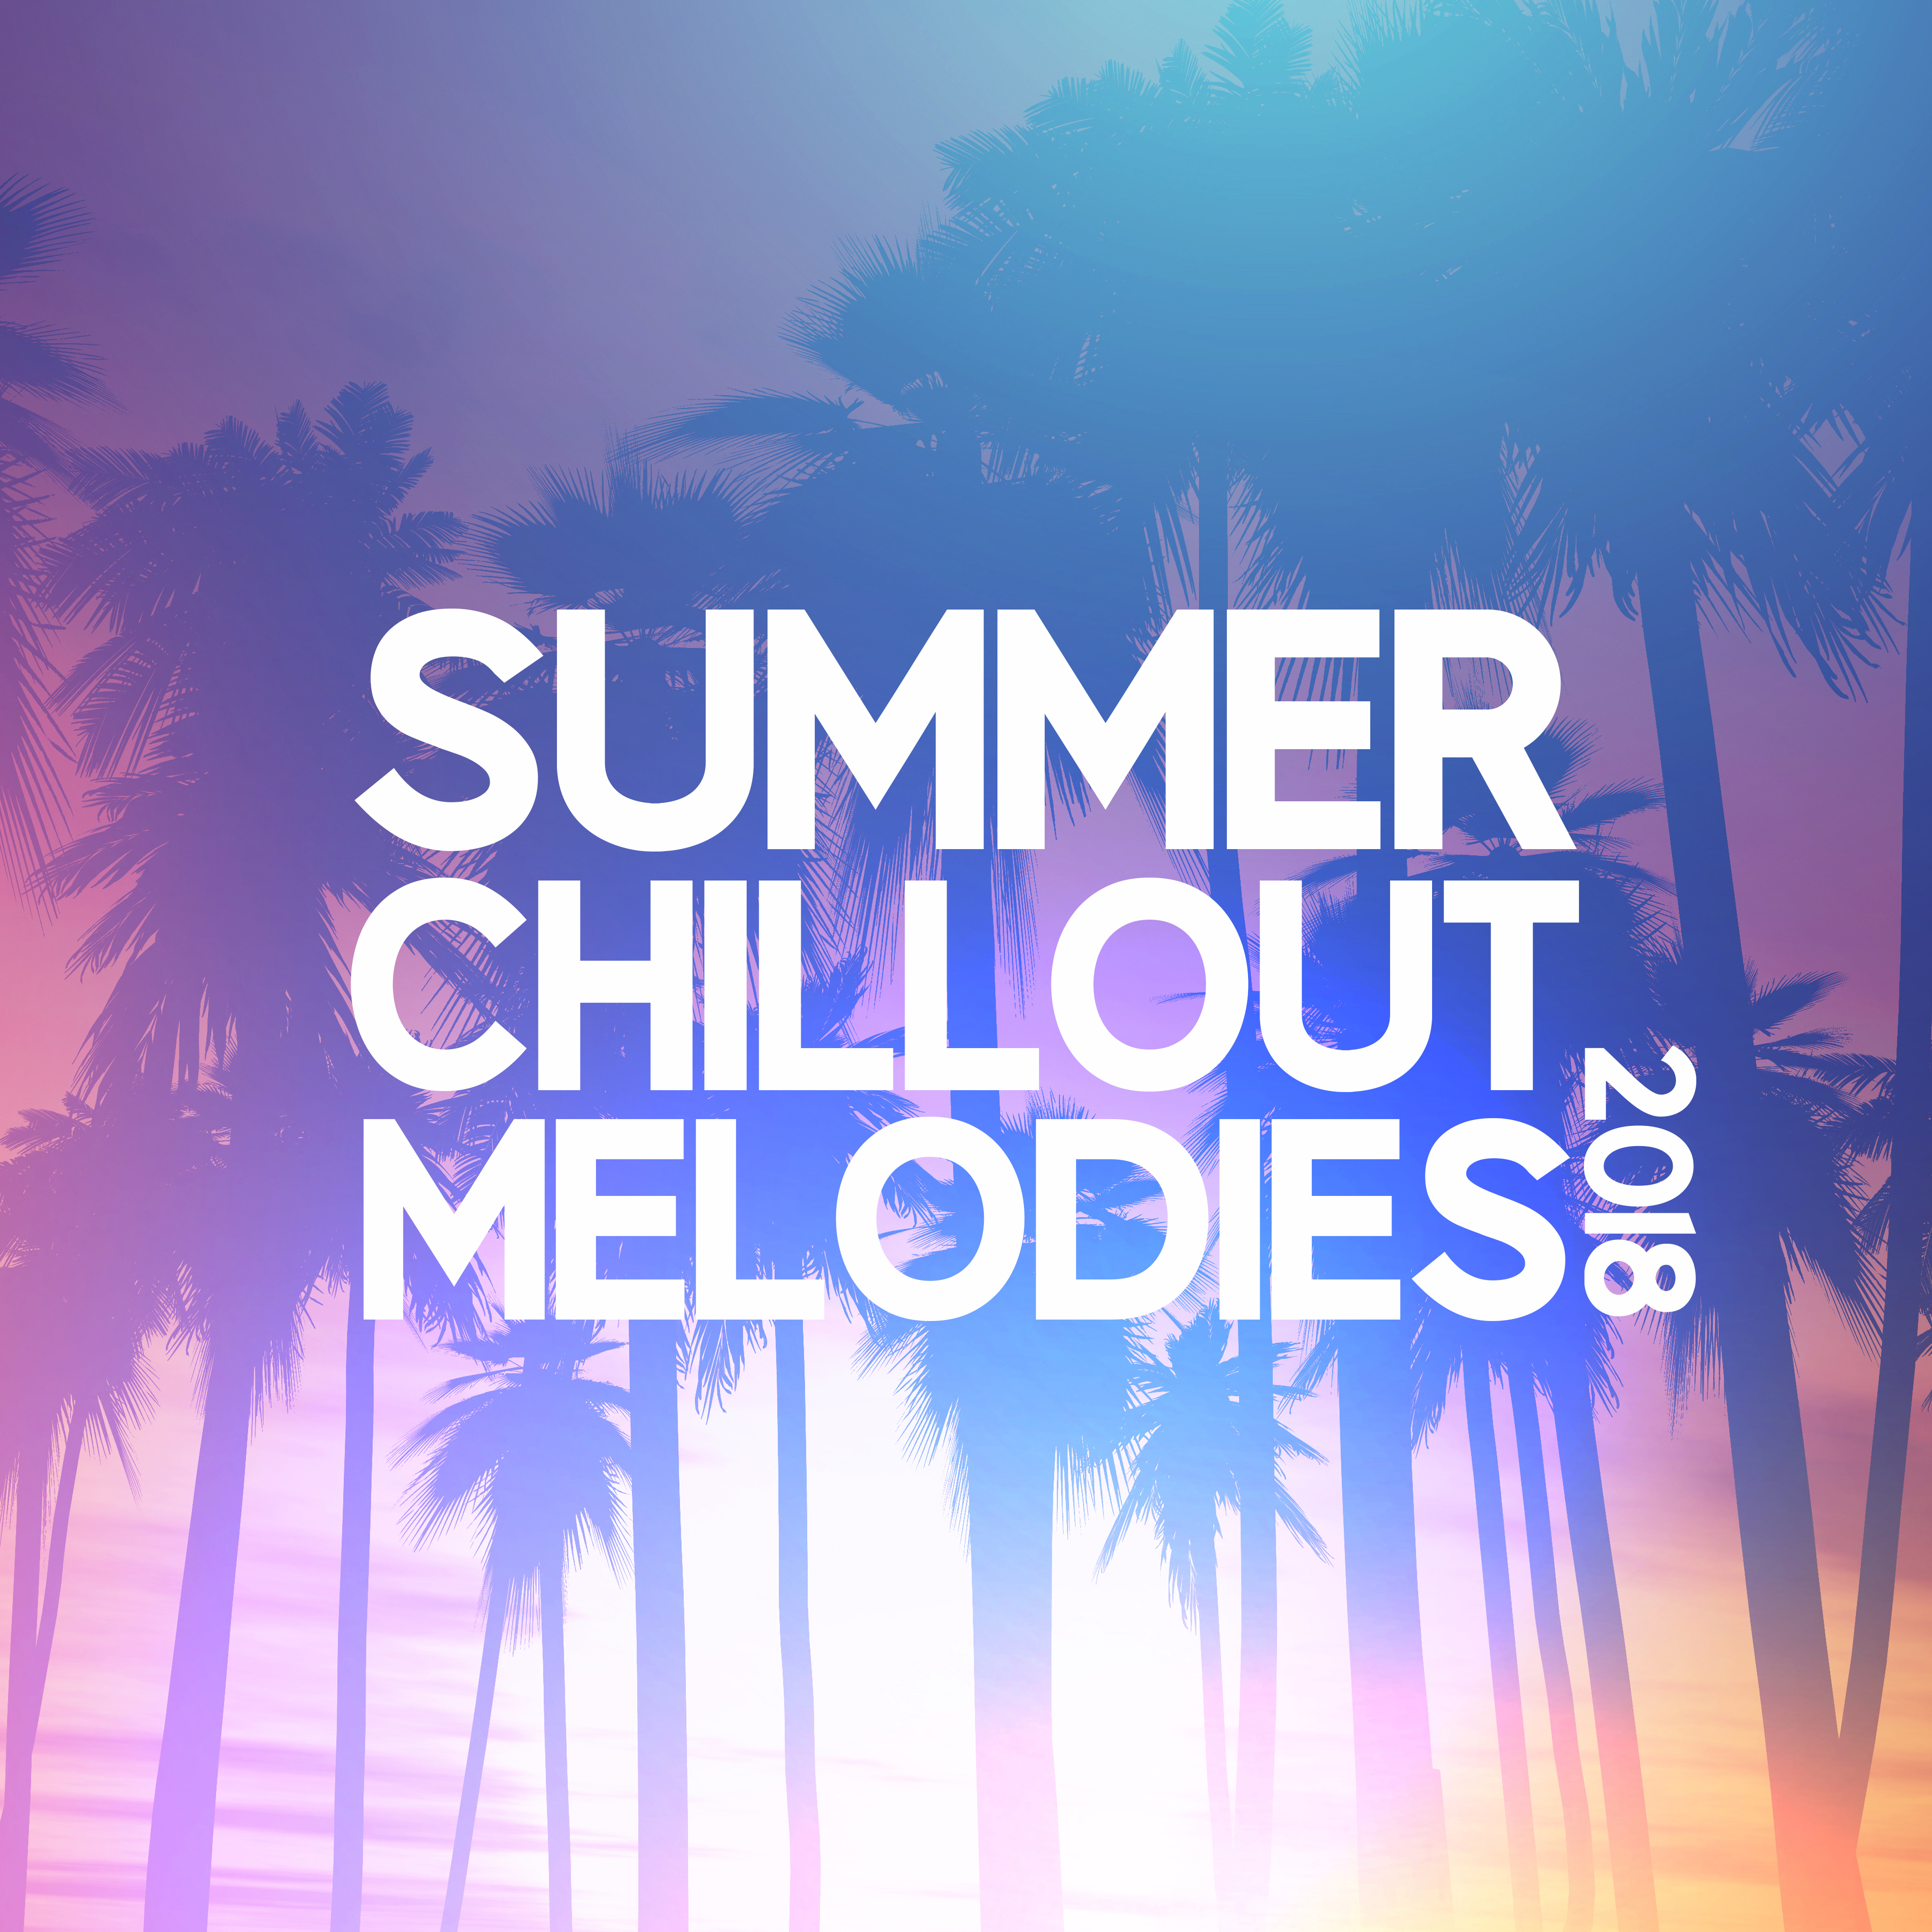 Summer Chillout Melodies 2018